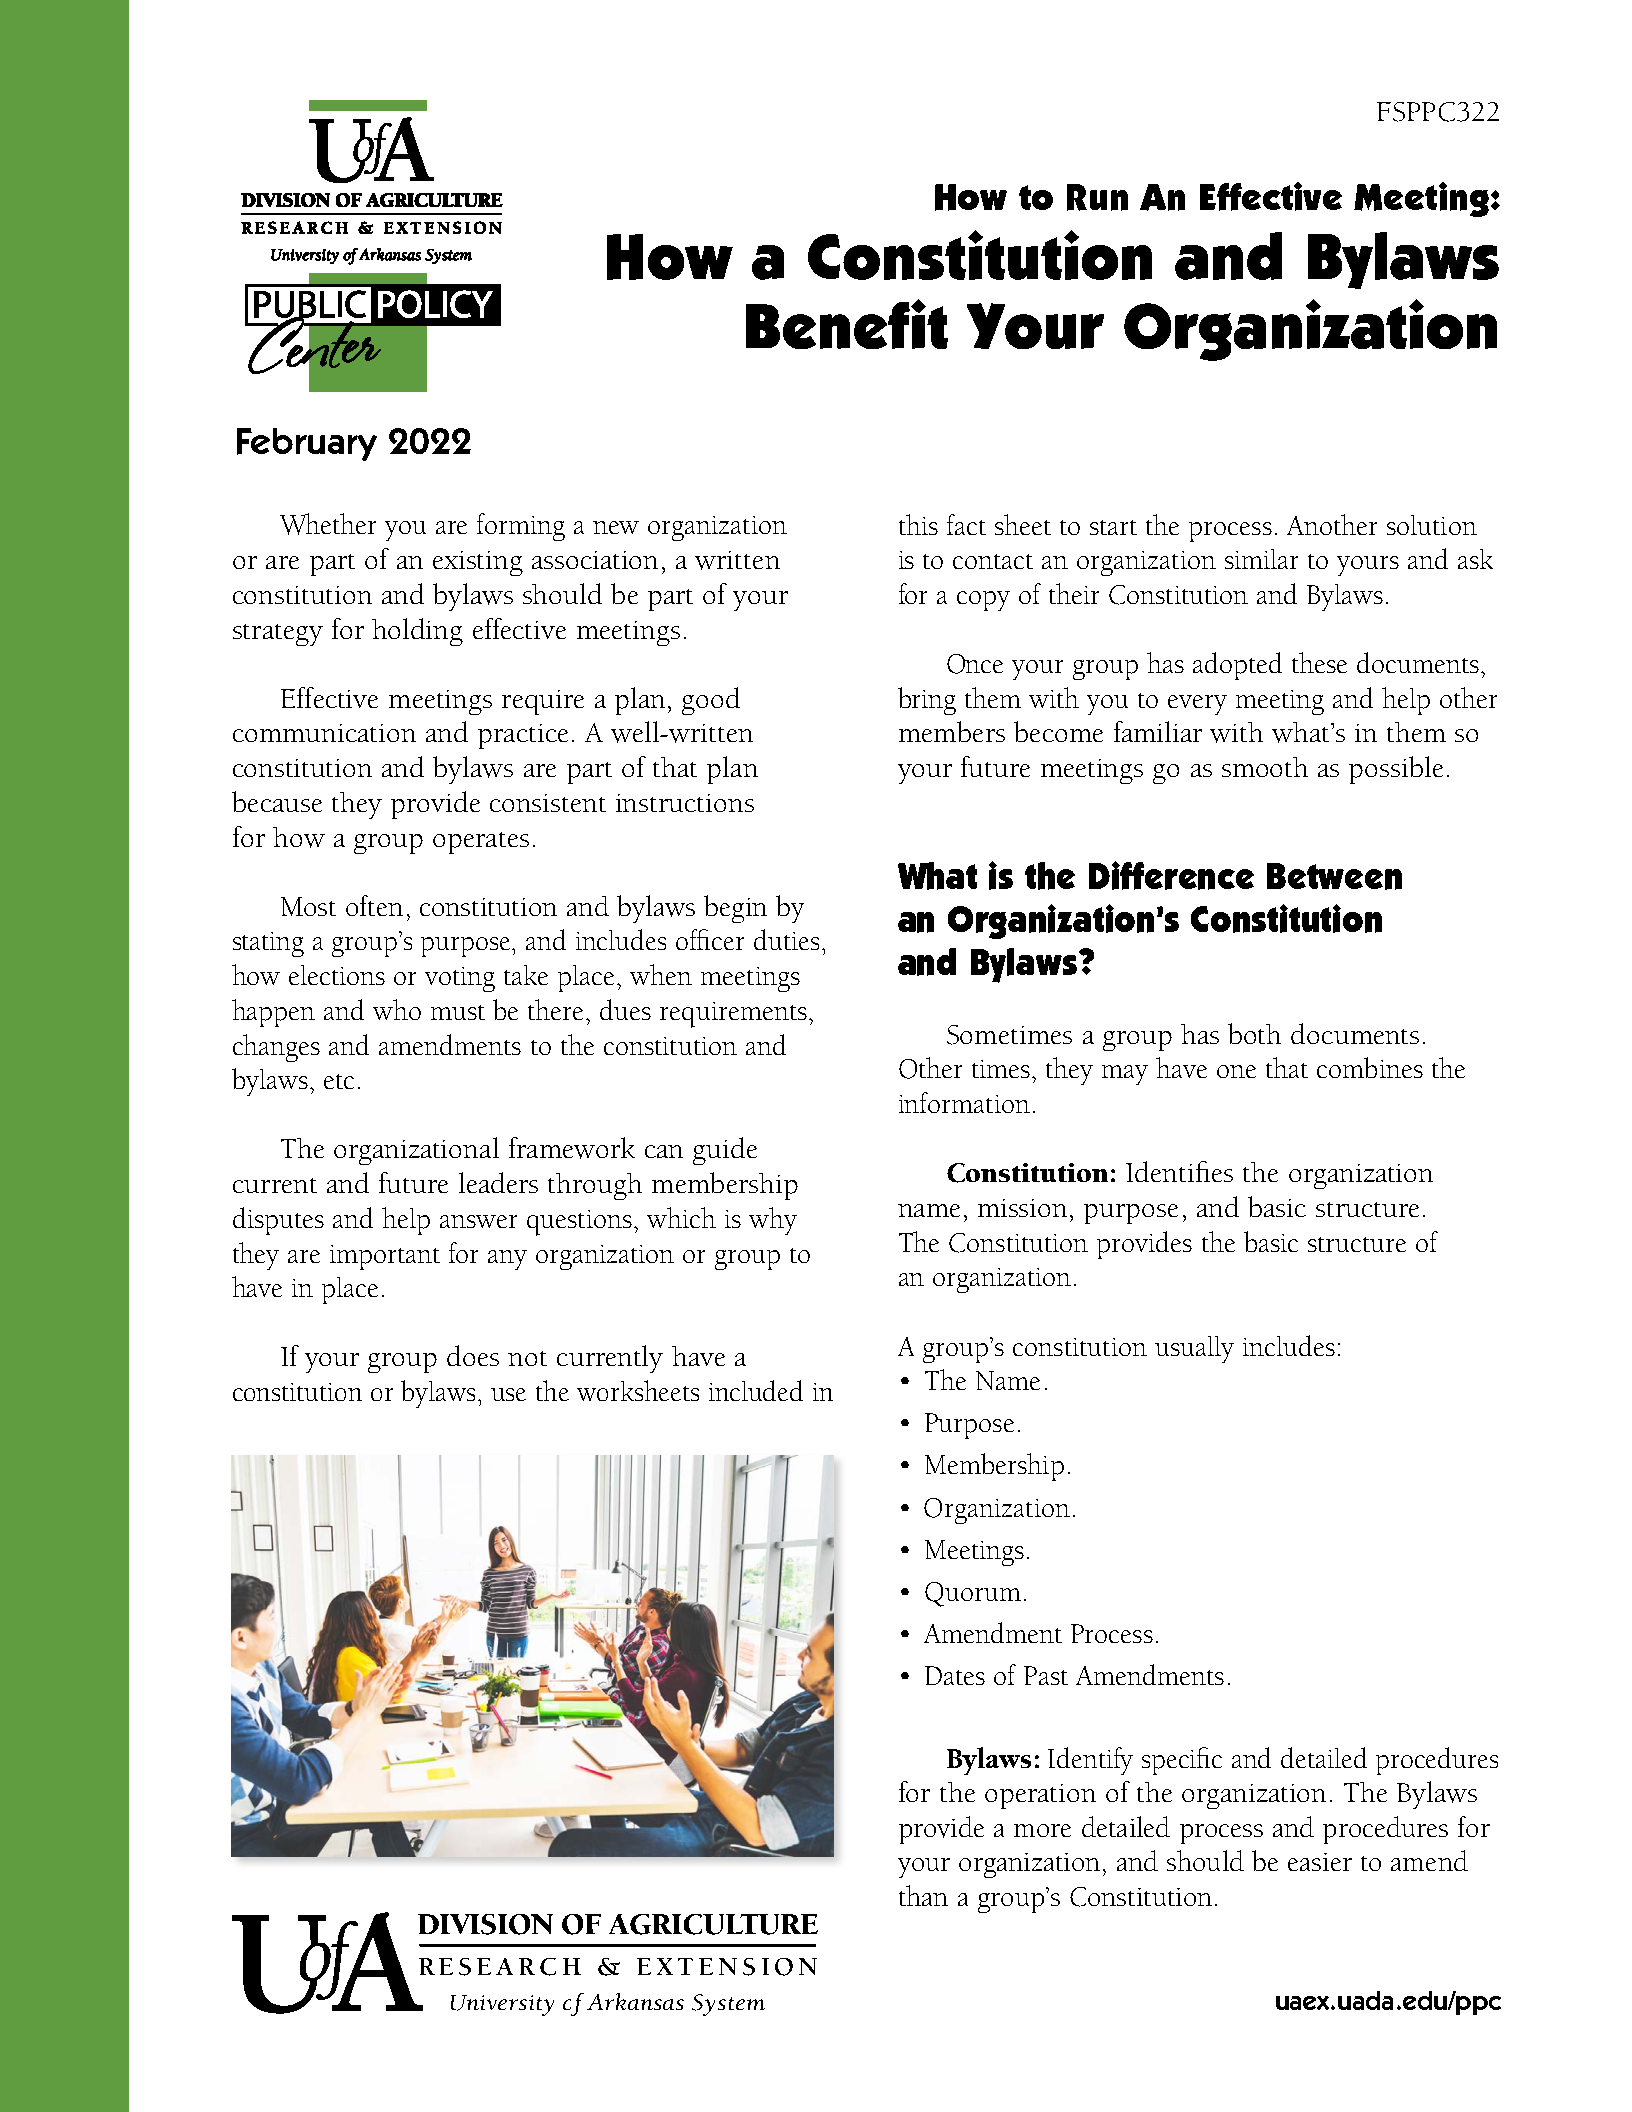 Front page of How a Constitution and Bylaws Benefit Your Organization Fact Sheet